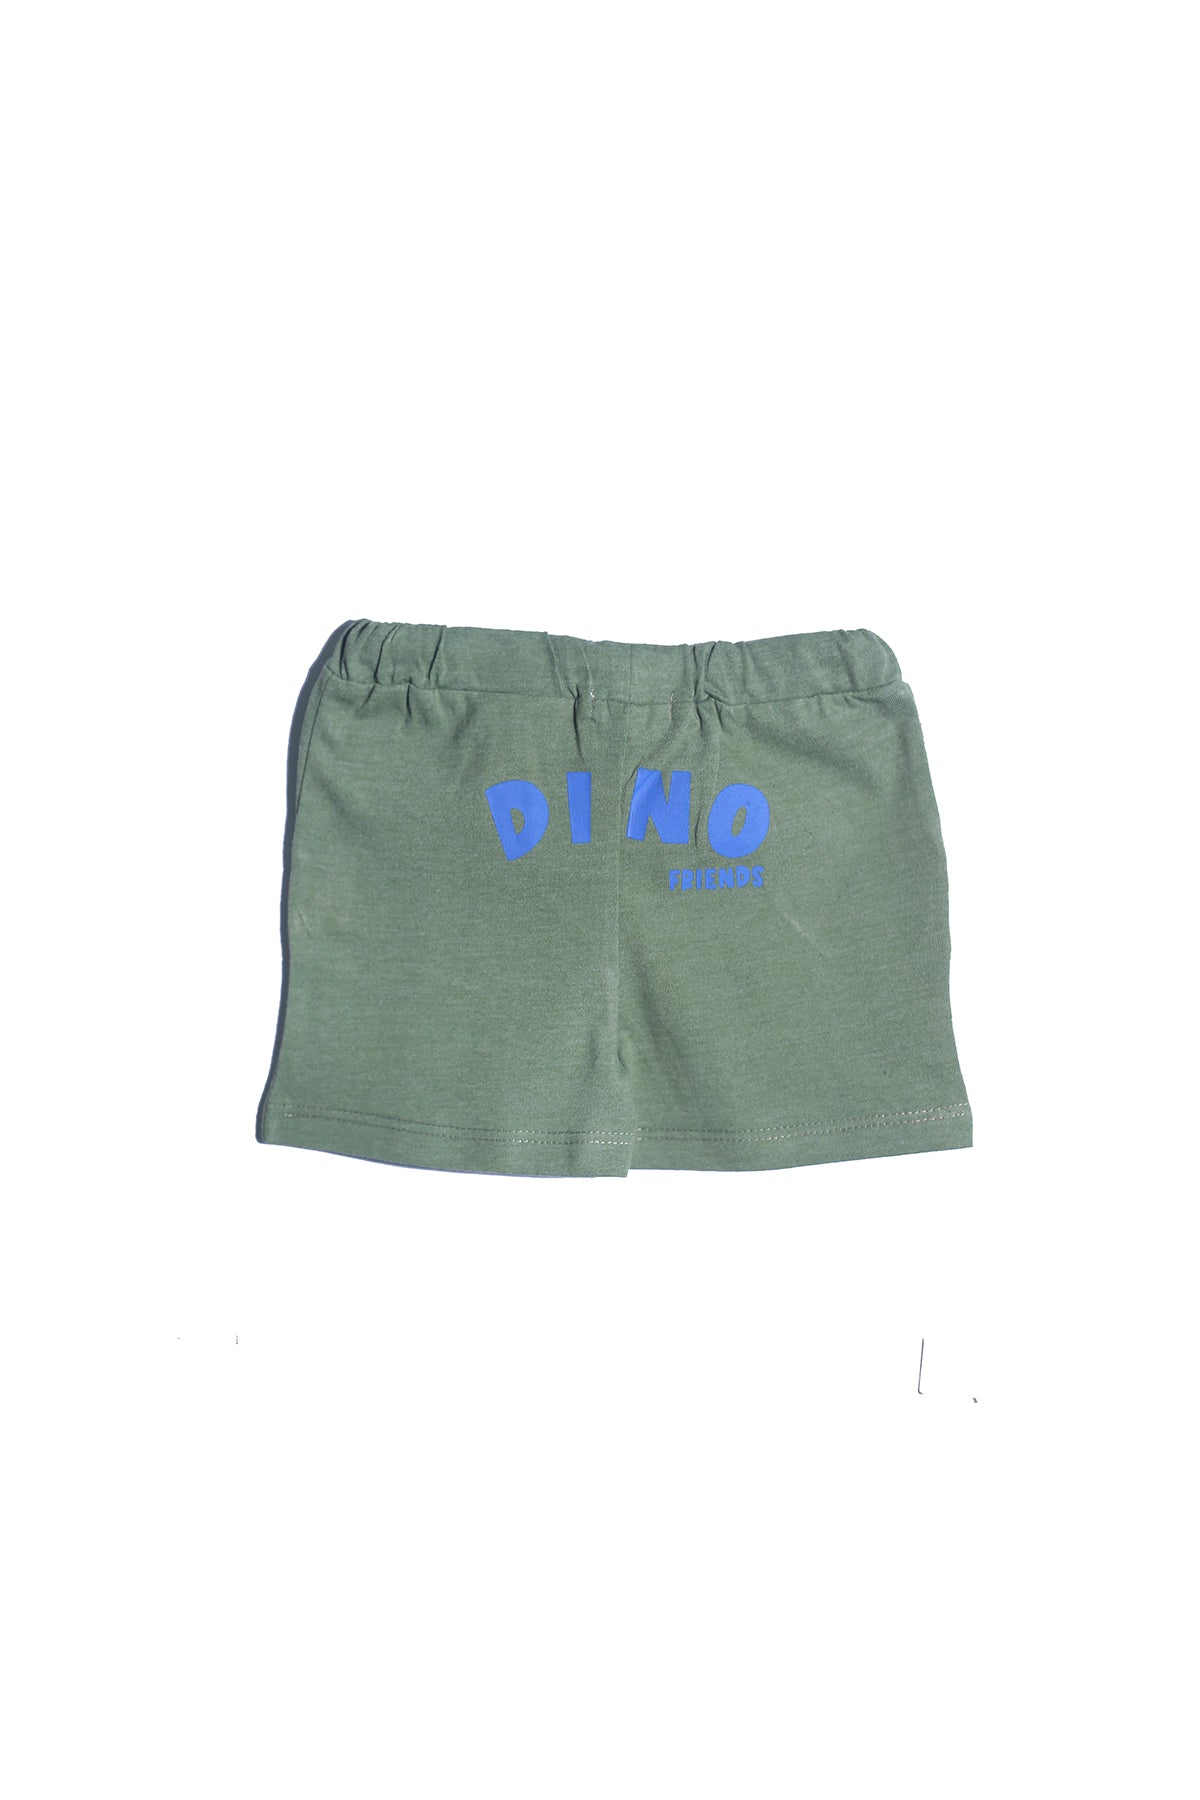 Shorts (Pack Of 2) (IBSP-063)